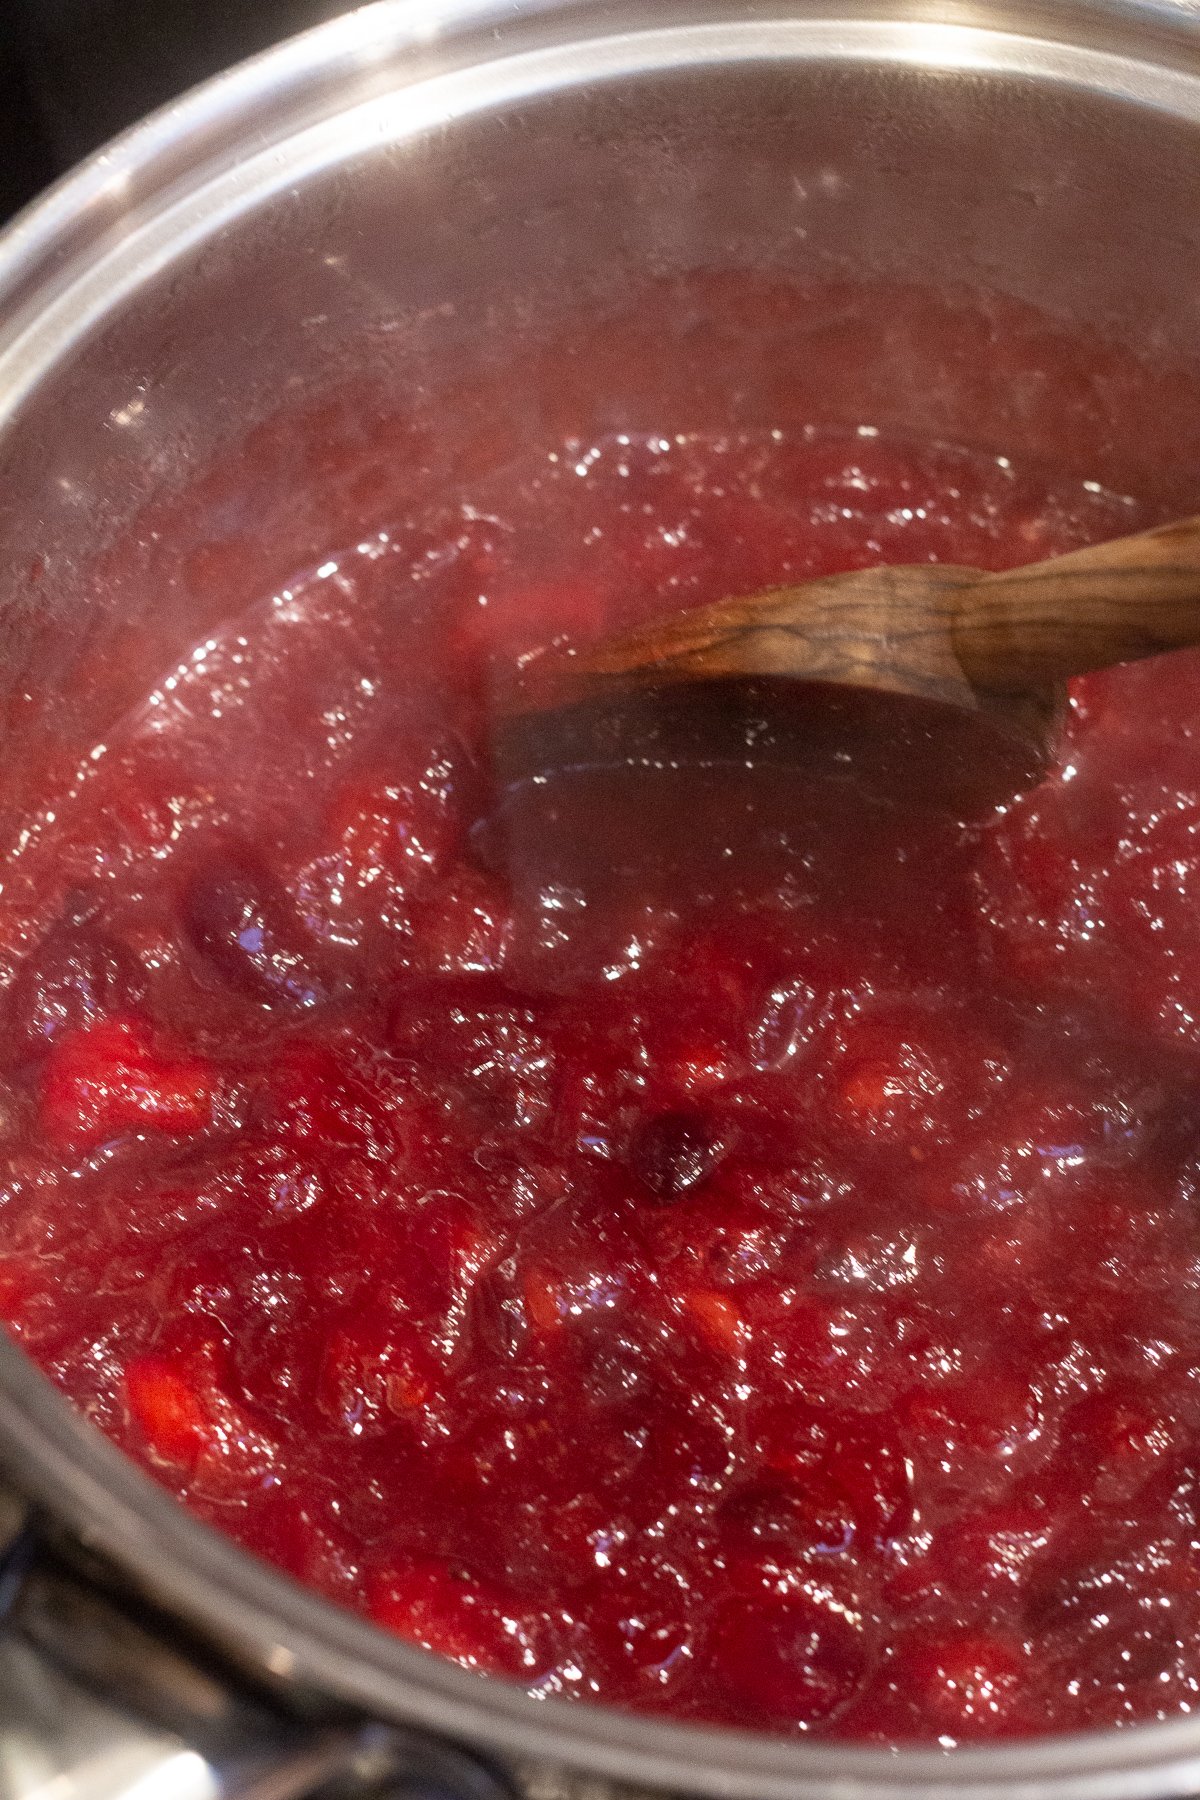 Cranberry sauce cooking in a saucepan.